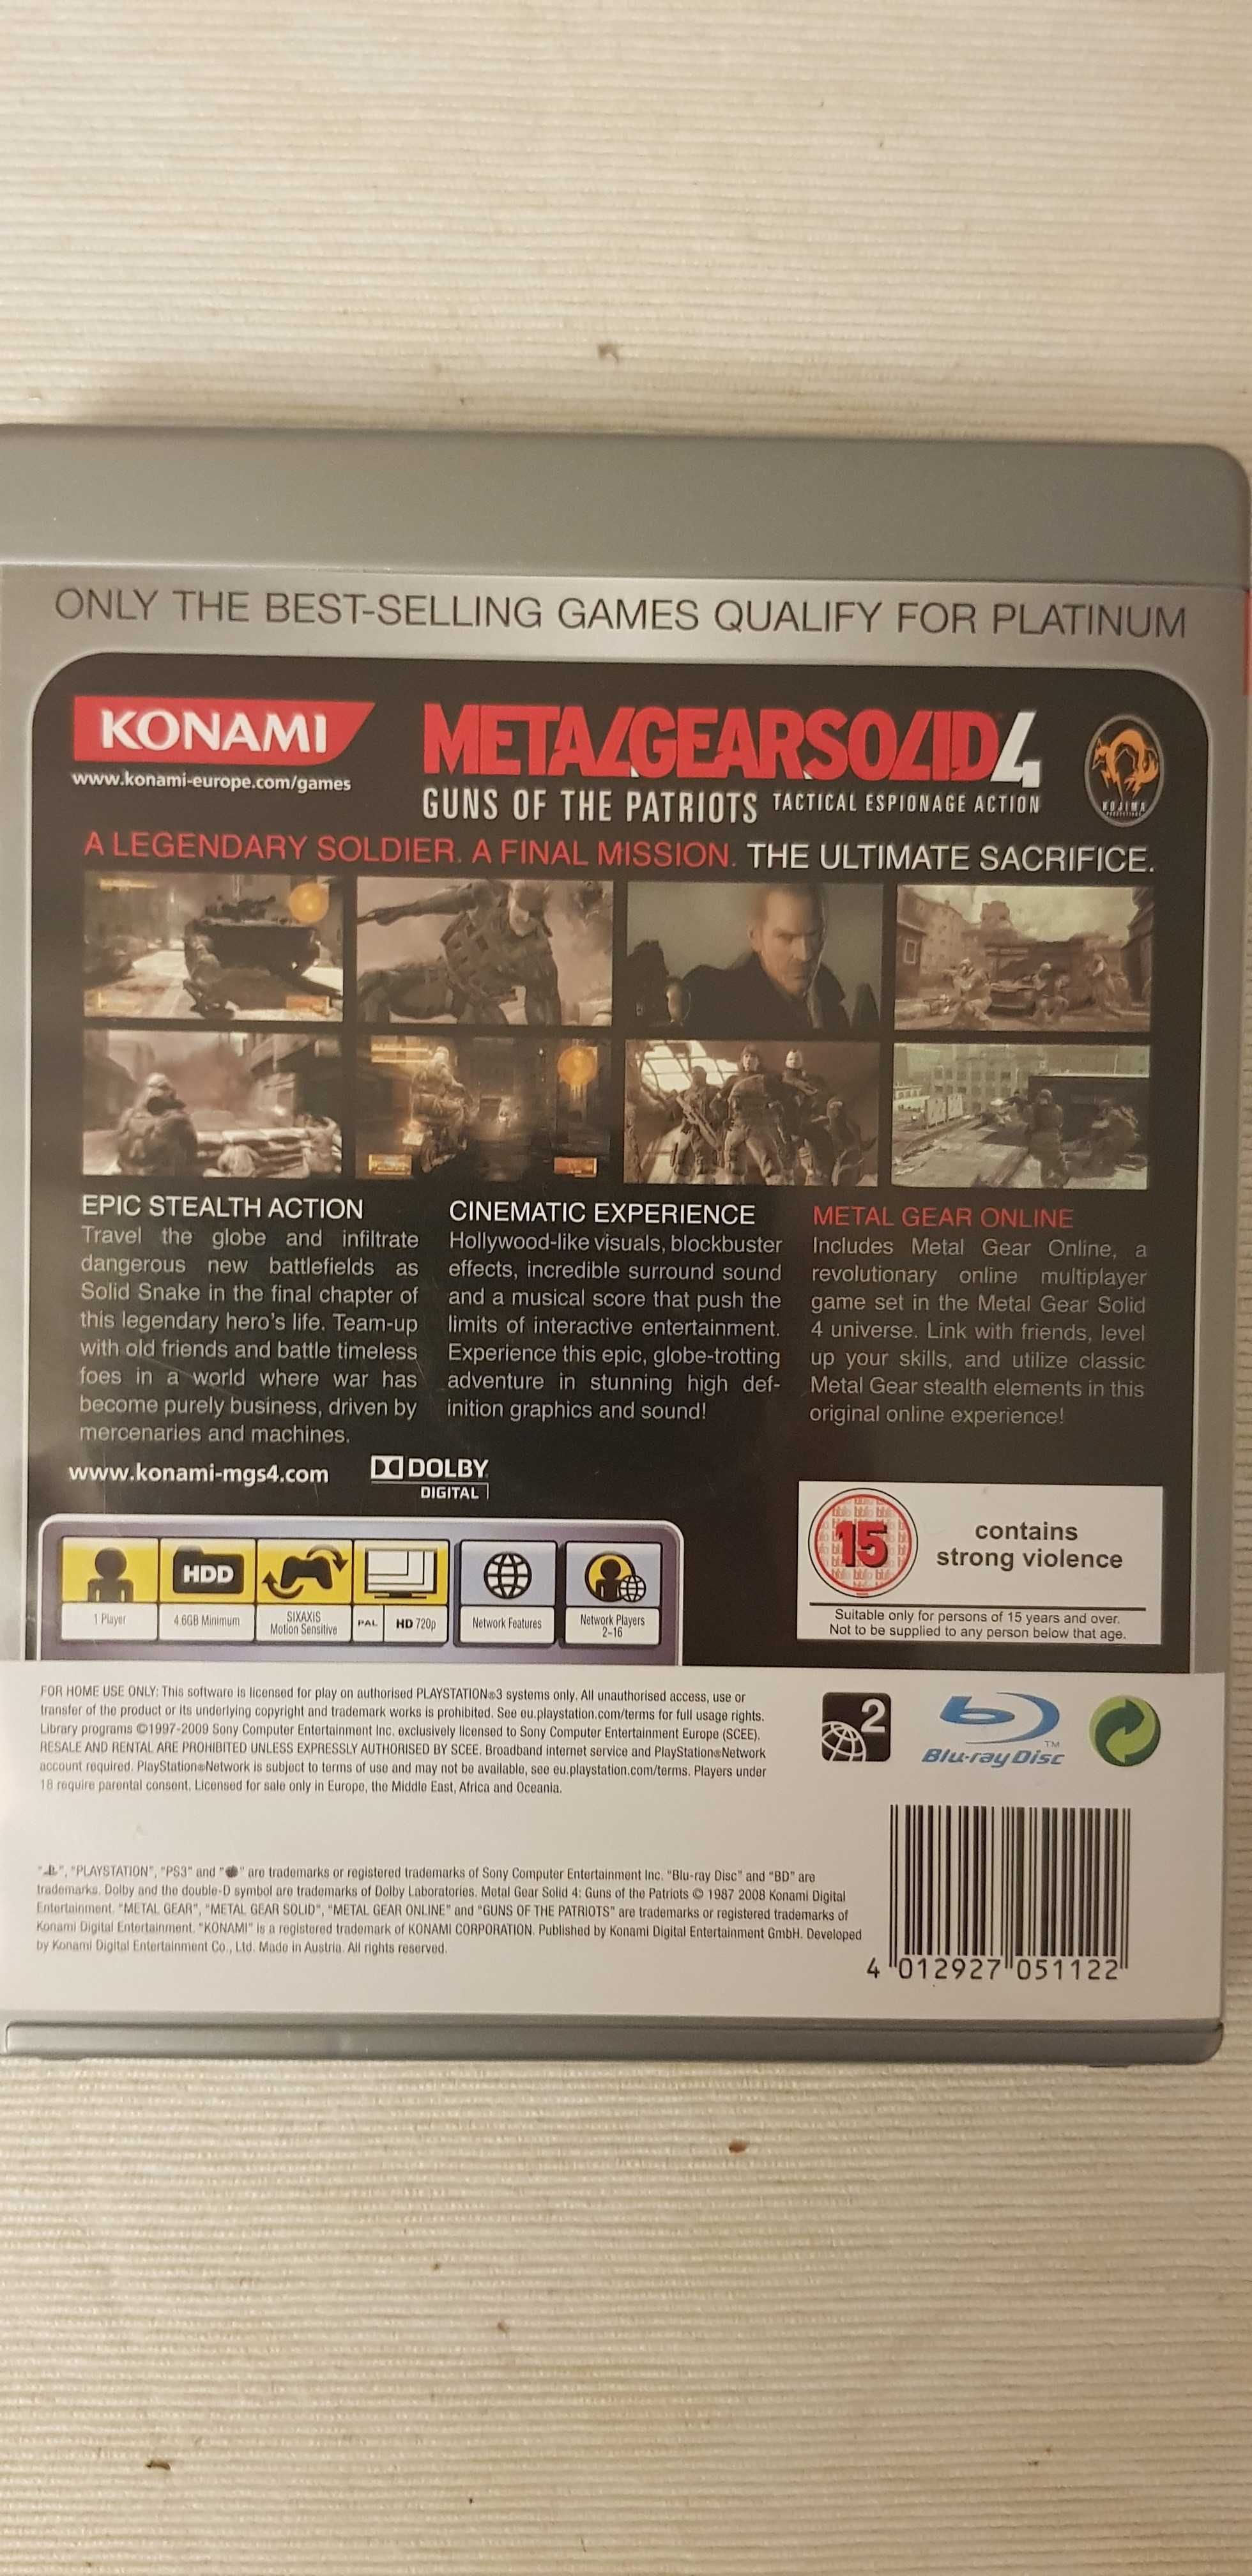 Metal Gear Solid 4: Guns of the Patriots Tactical Espionage Action PS3